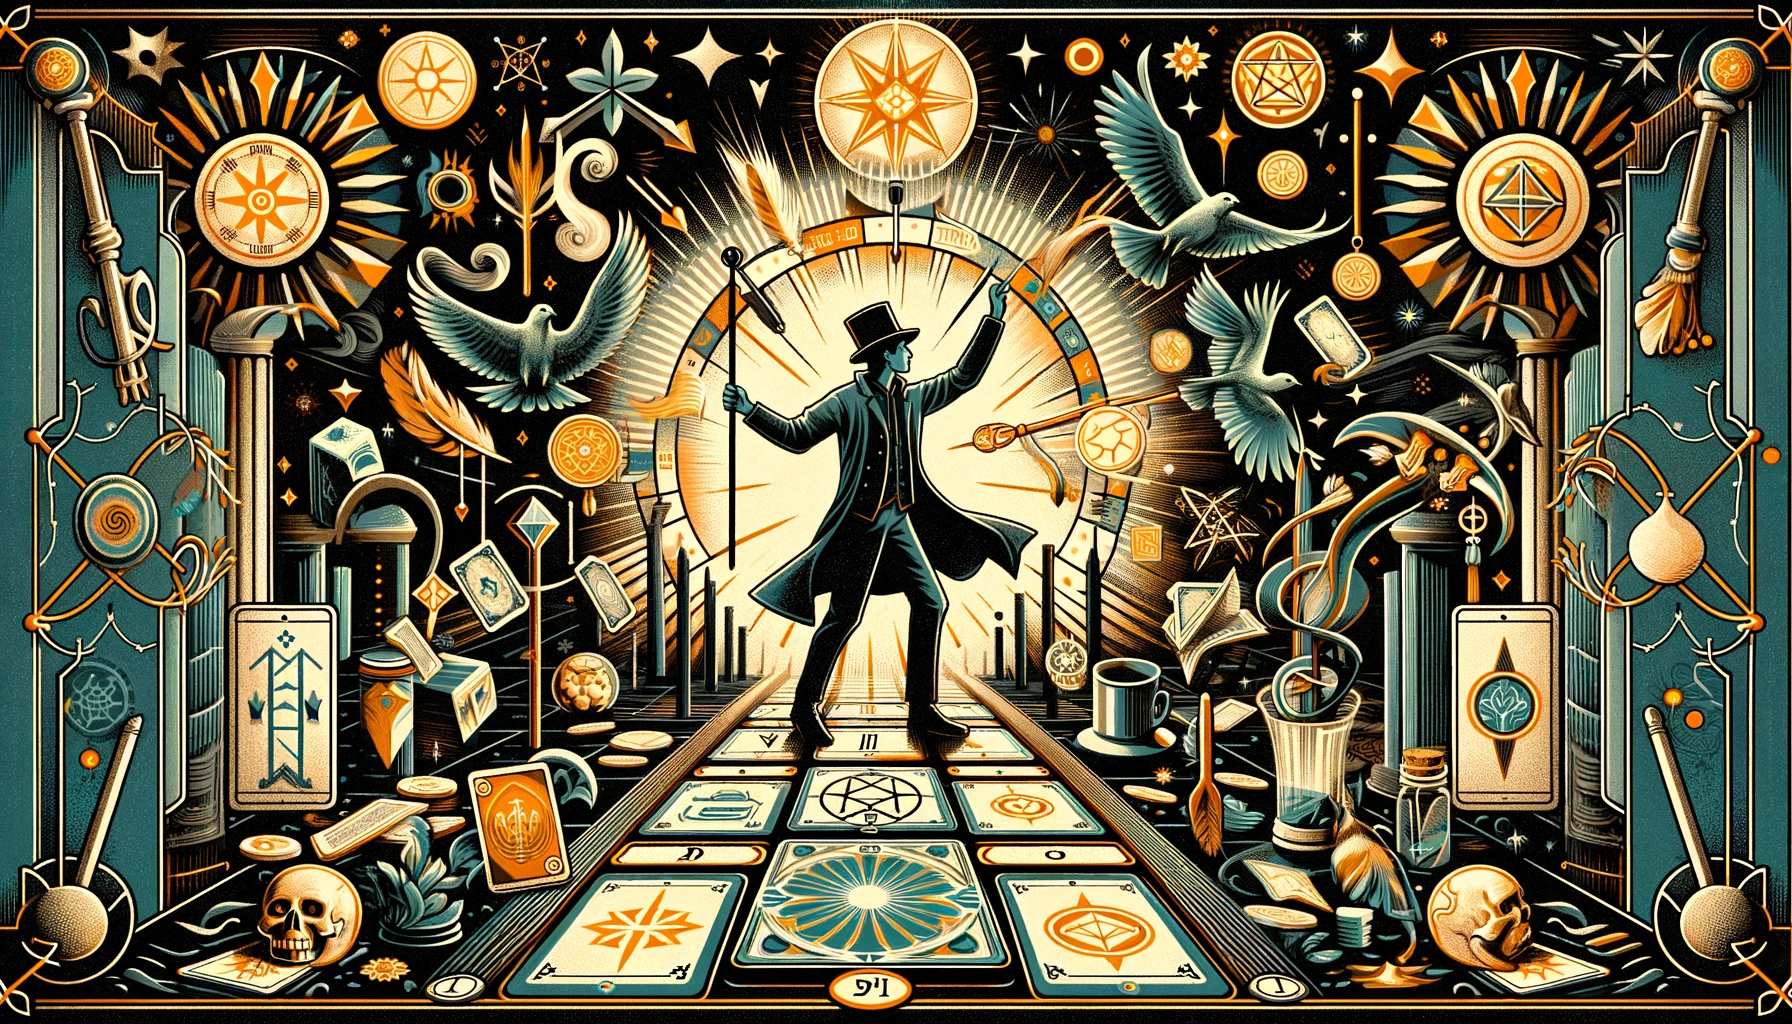 "An illustration depicting 'The Magician' Tarot card, featuring a figure in a moment of concentration, surrounded by symbols representing skills, creativity, and the power to manifest desires into reality, capturing the essence of a pivotal moment of empowerment and potential."